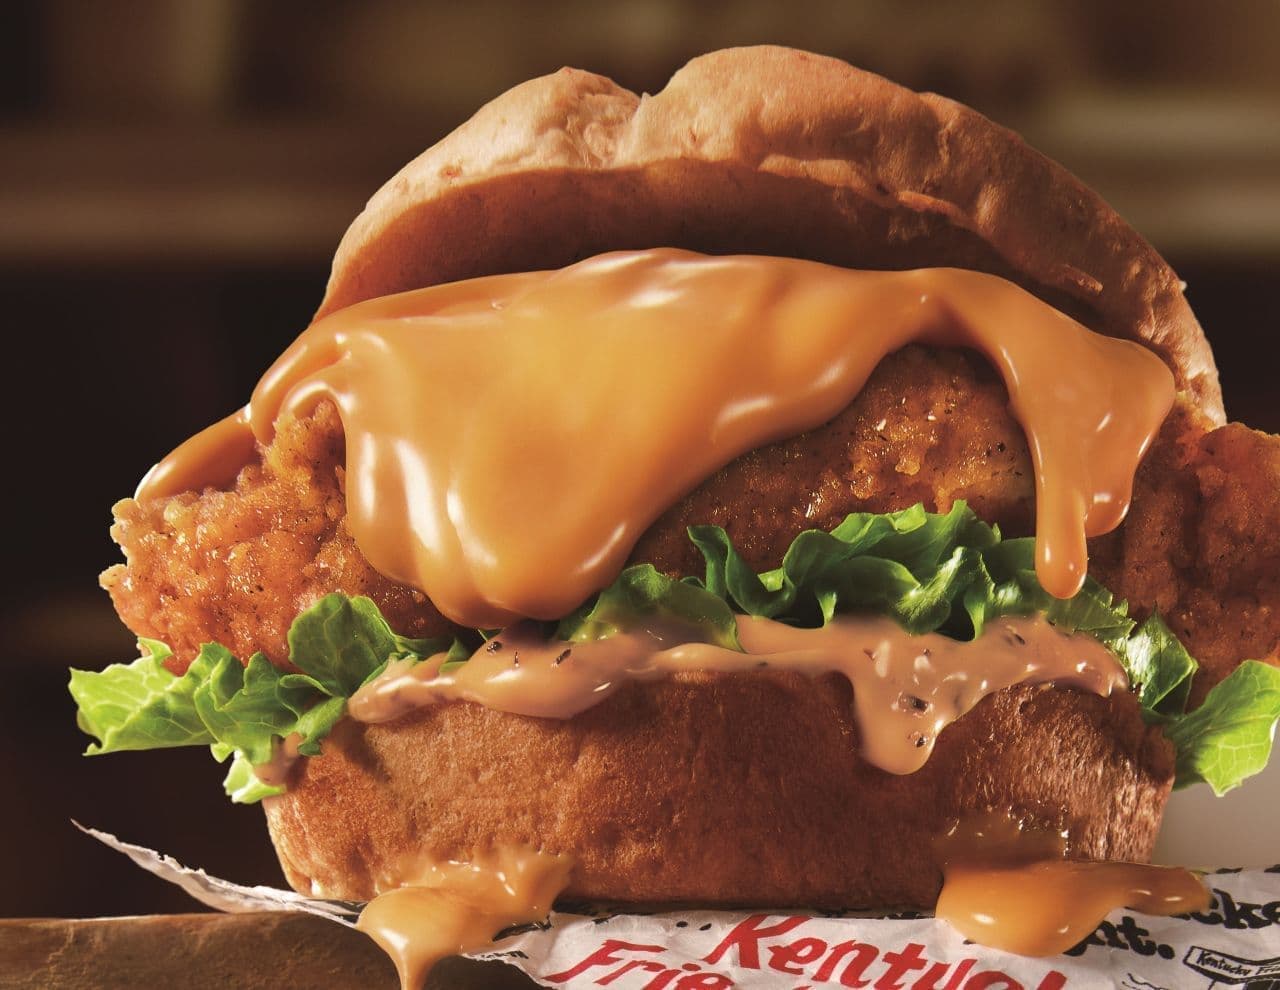 Kentucky Fried Chicken "Cheese-Drowned Filet Sandwiches